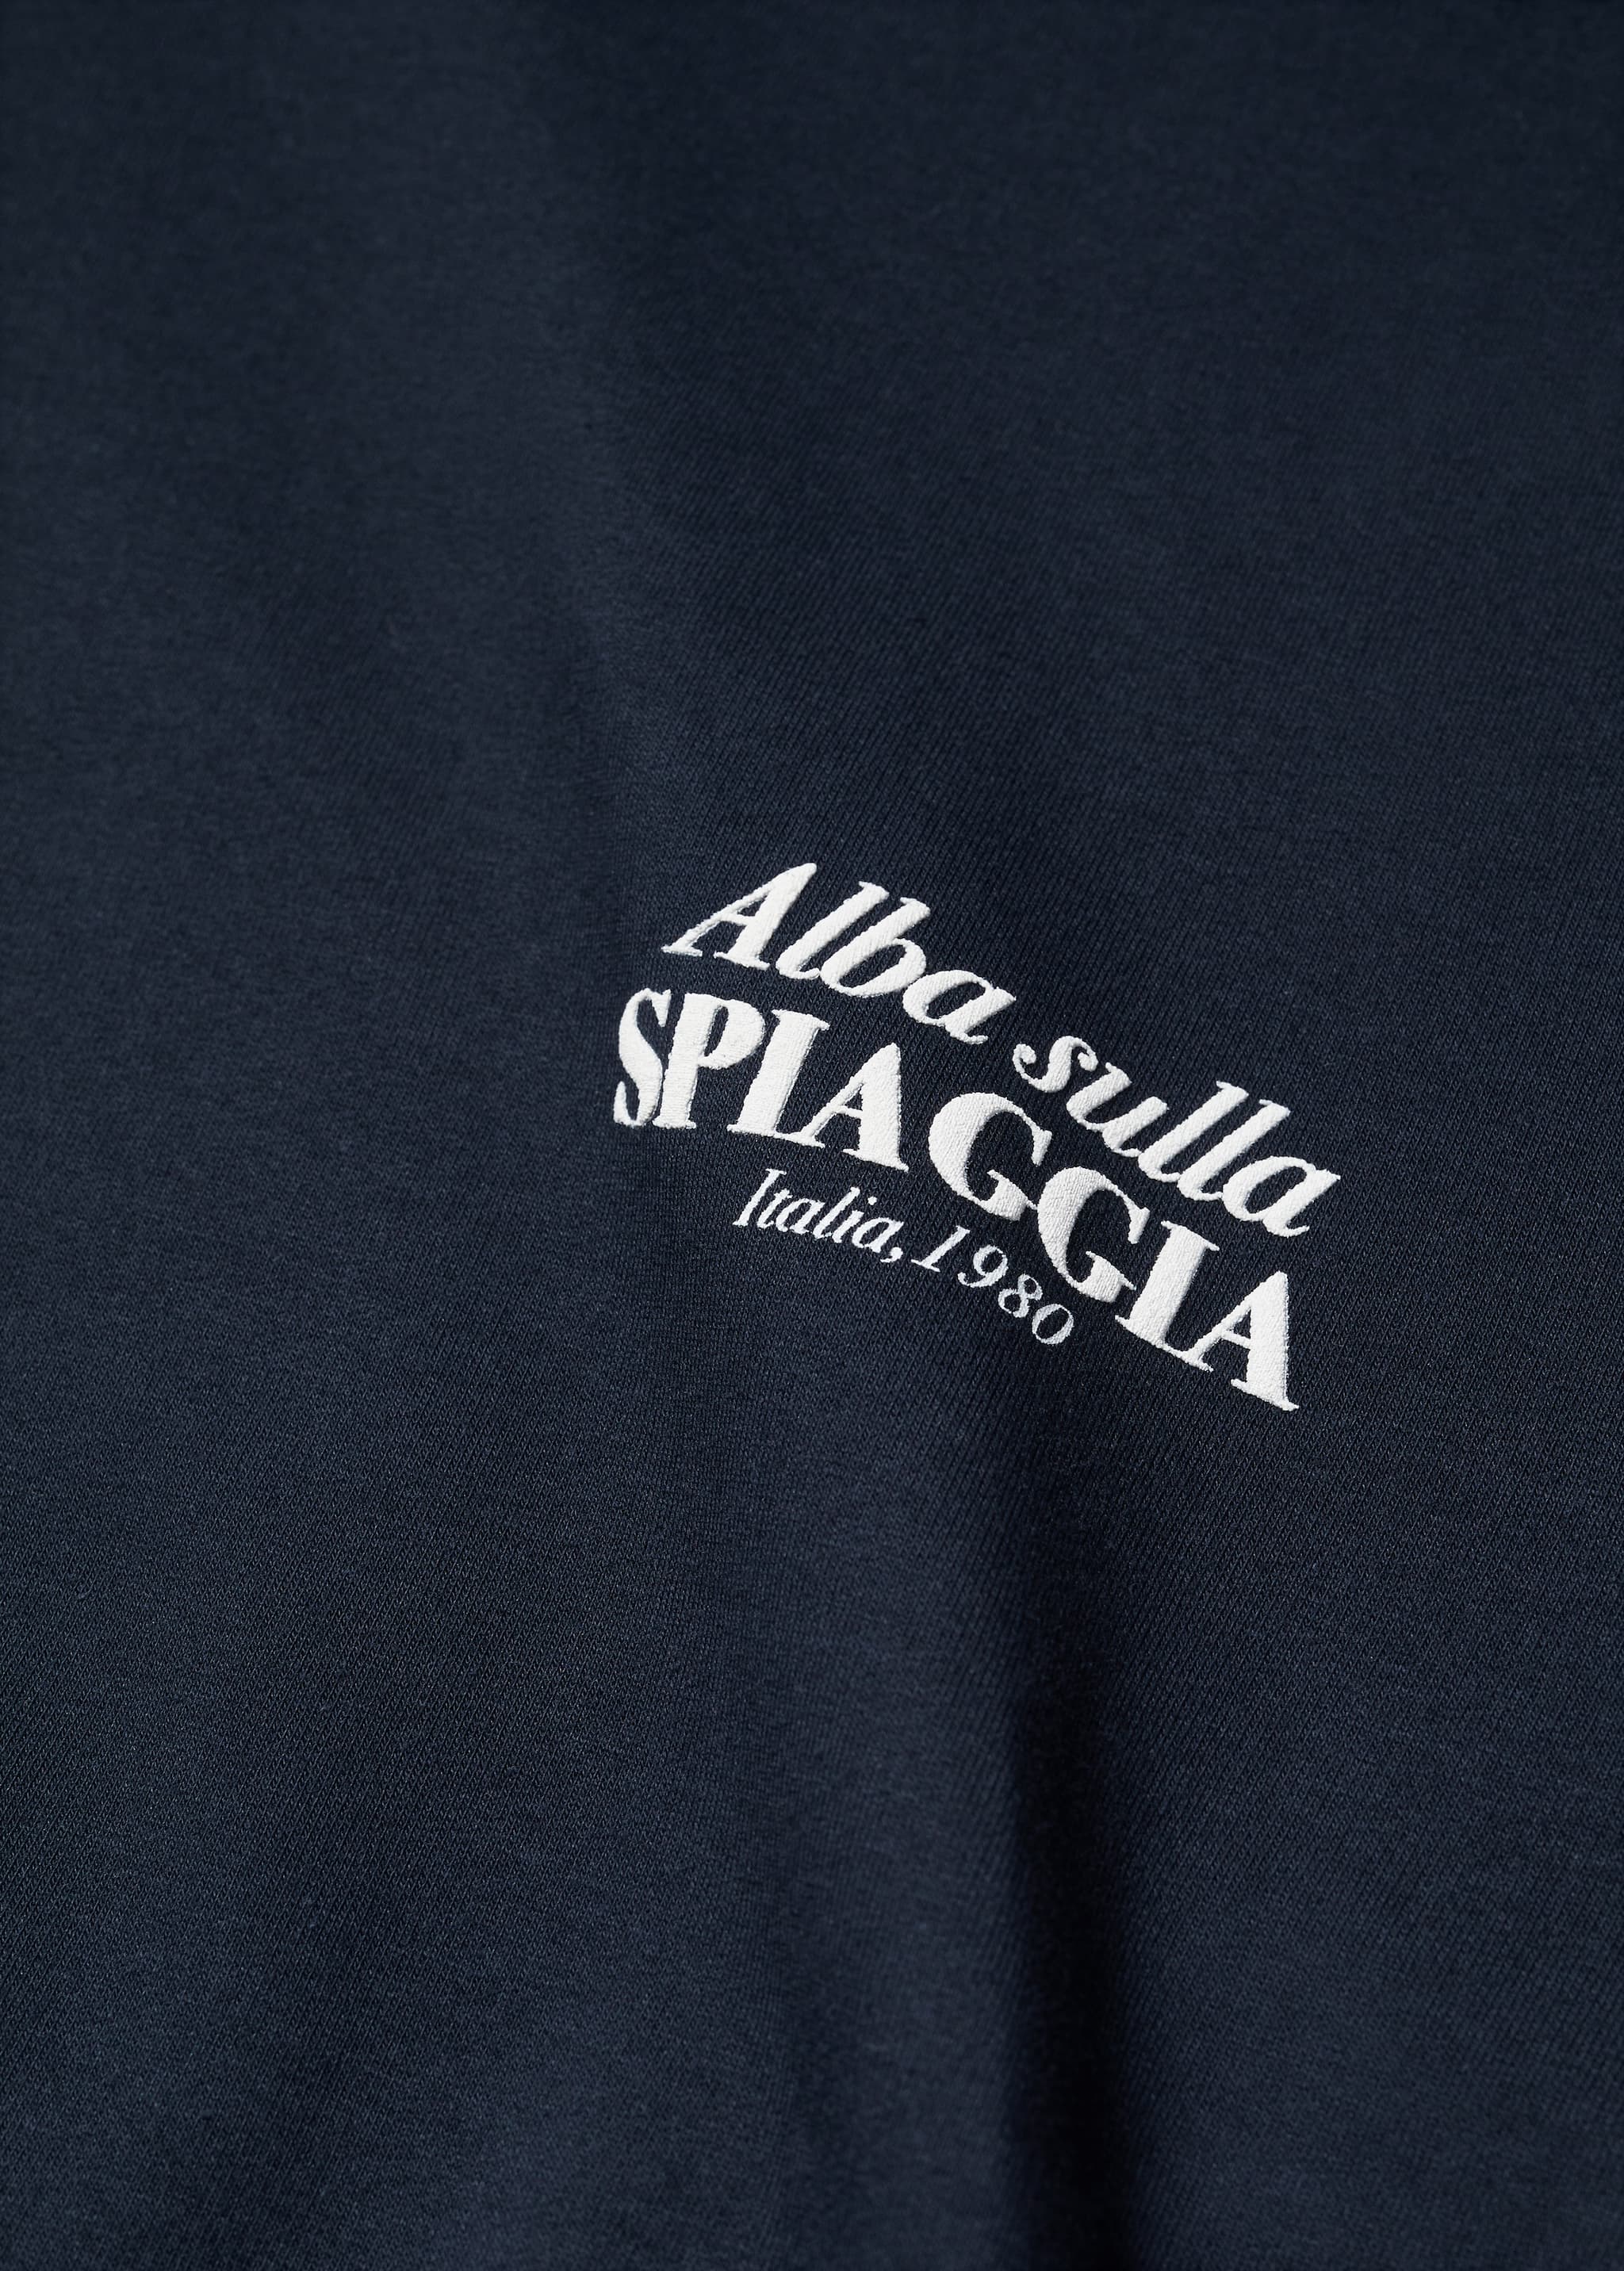 Hooded sweatshirt with text - Details of the article 8